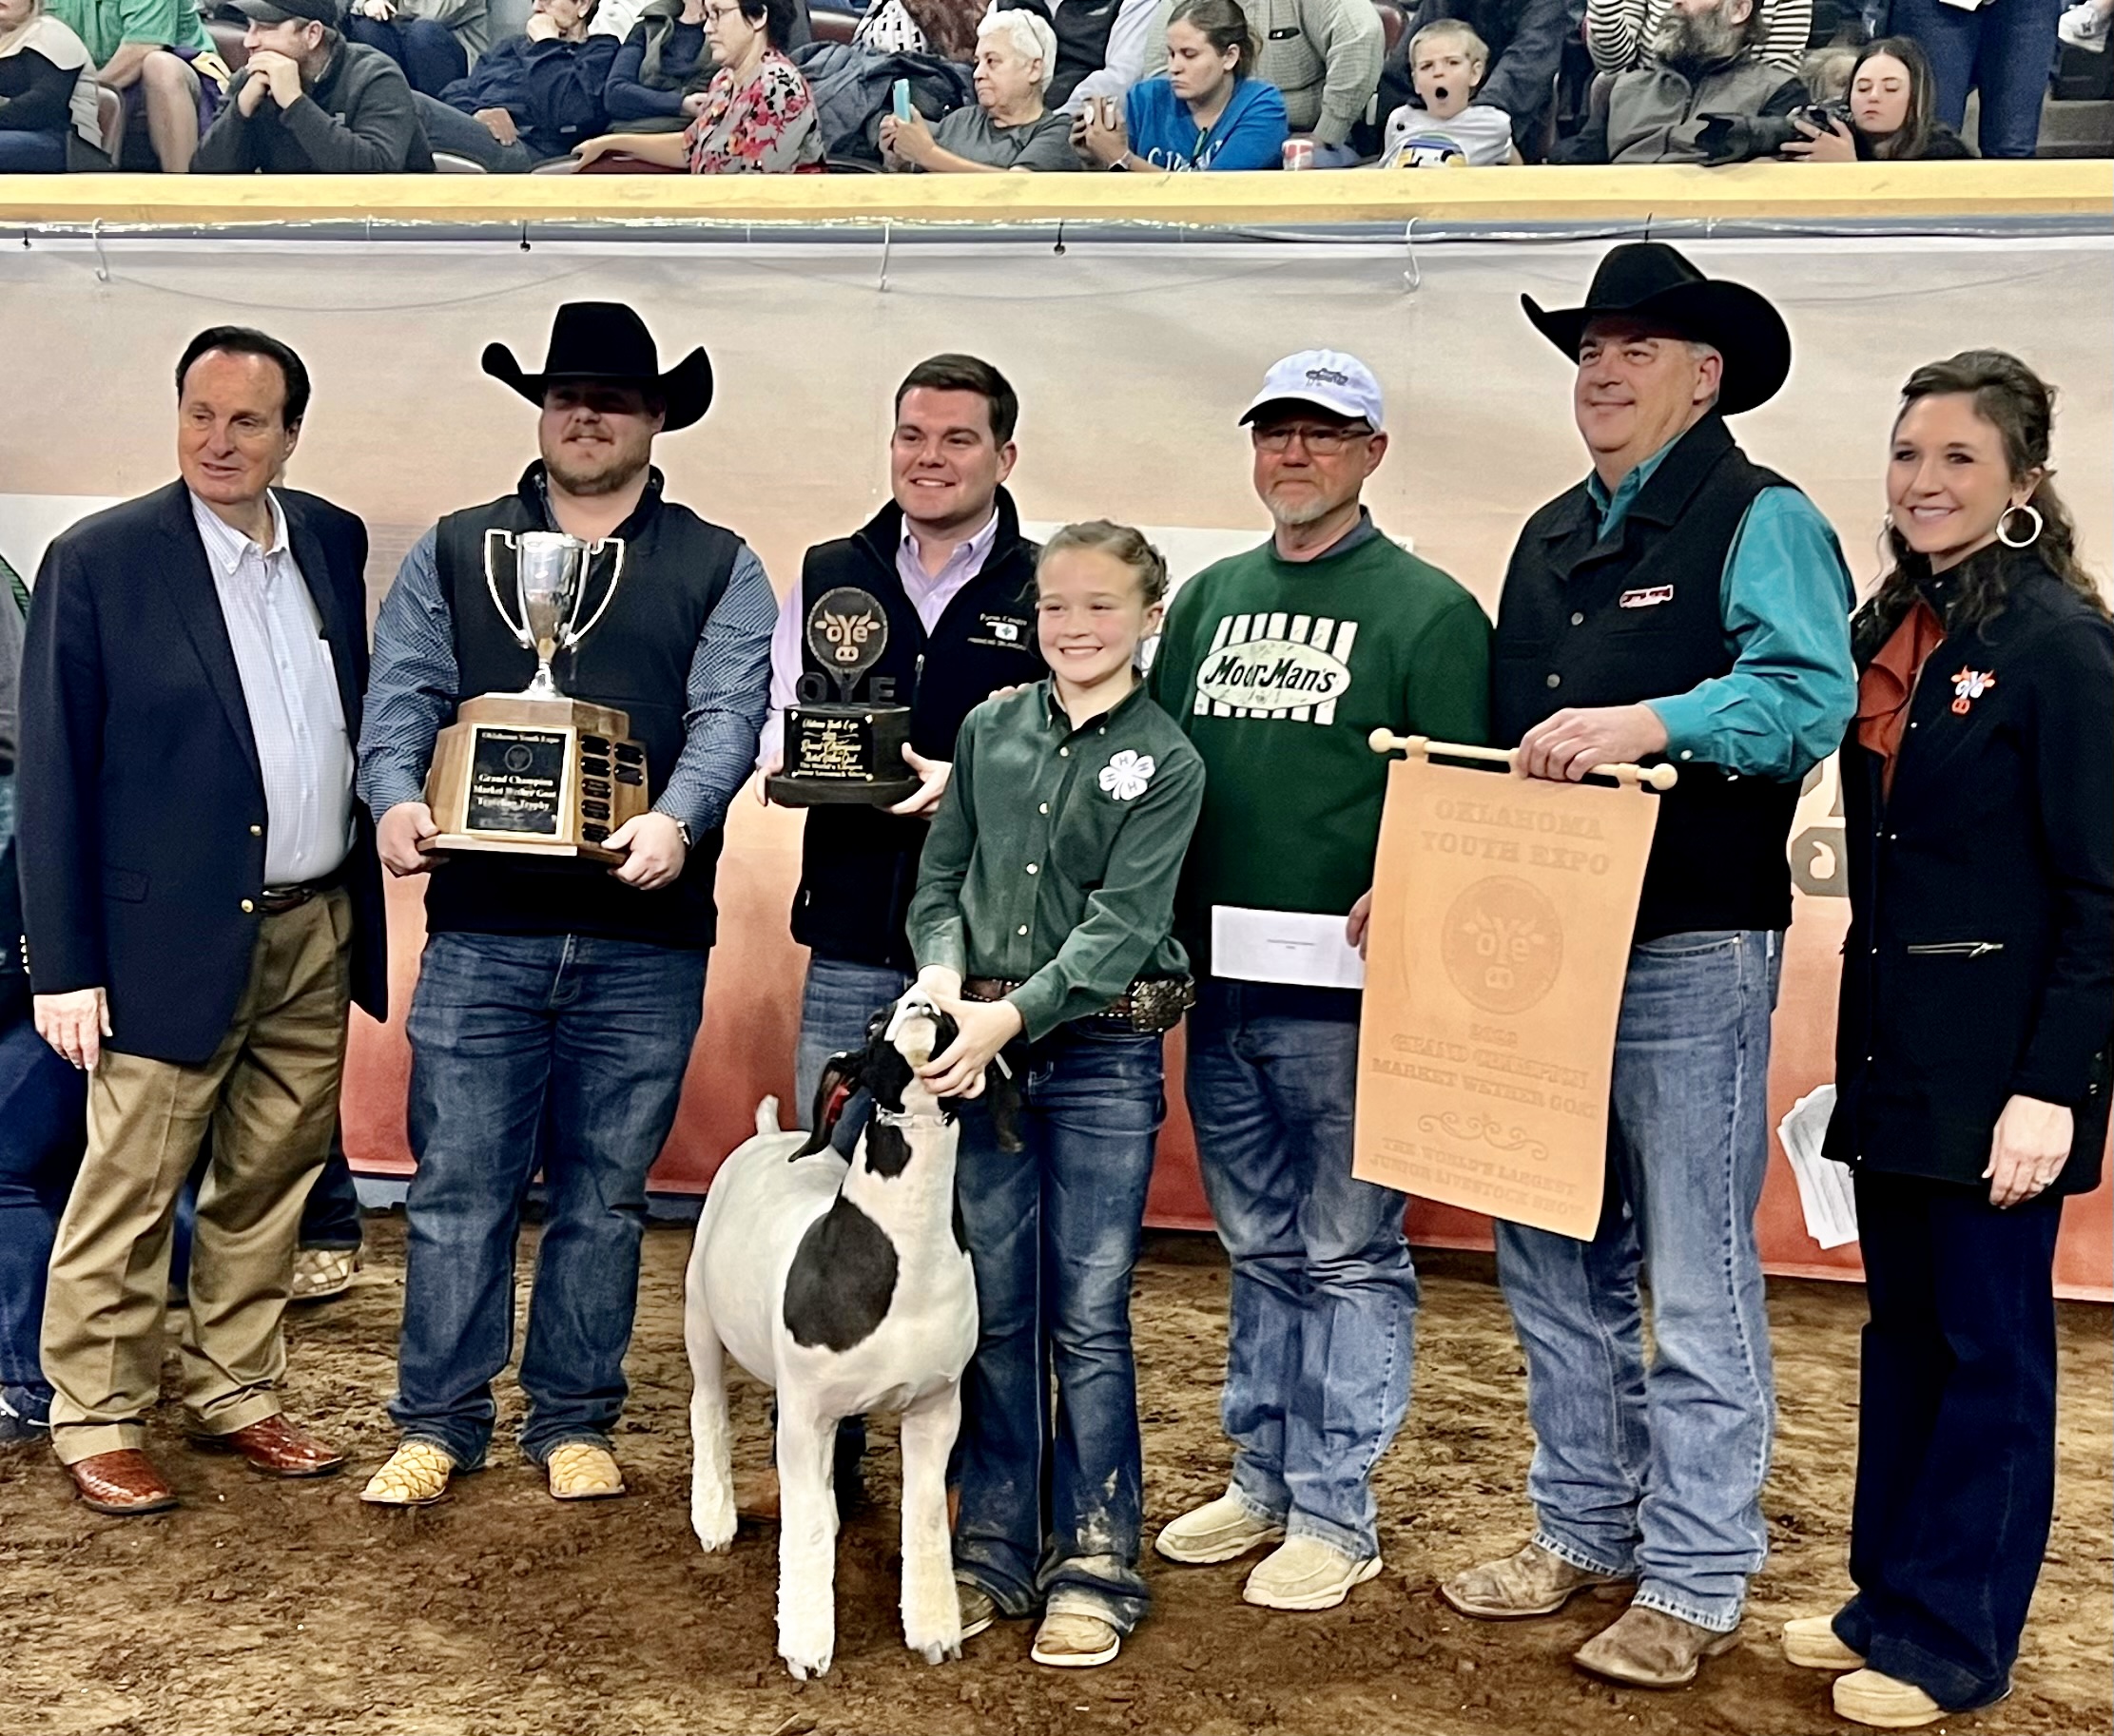 Sayde Allen of Canute 4-H Earns Grand Champion Market Goat Honors with Her Market Goat